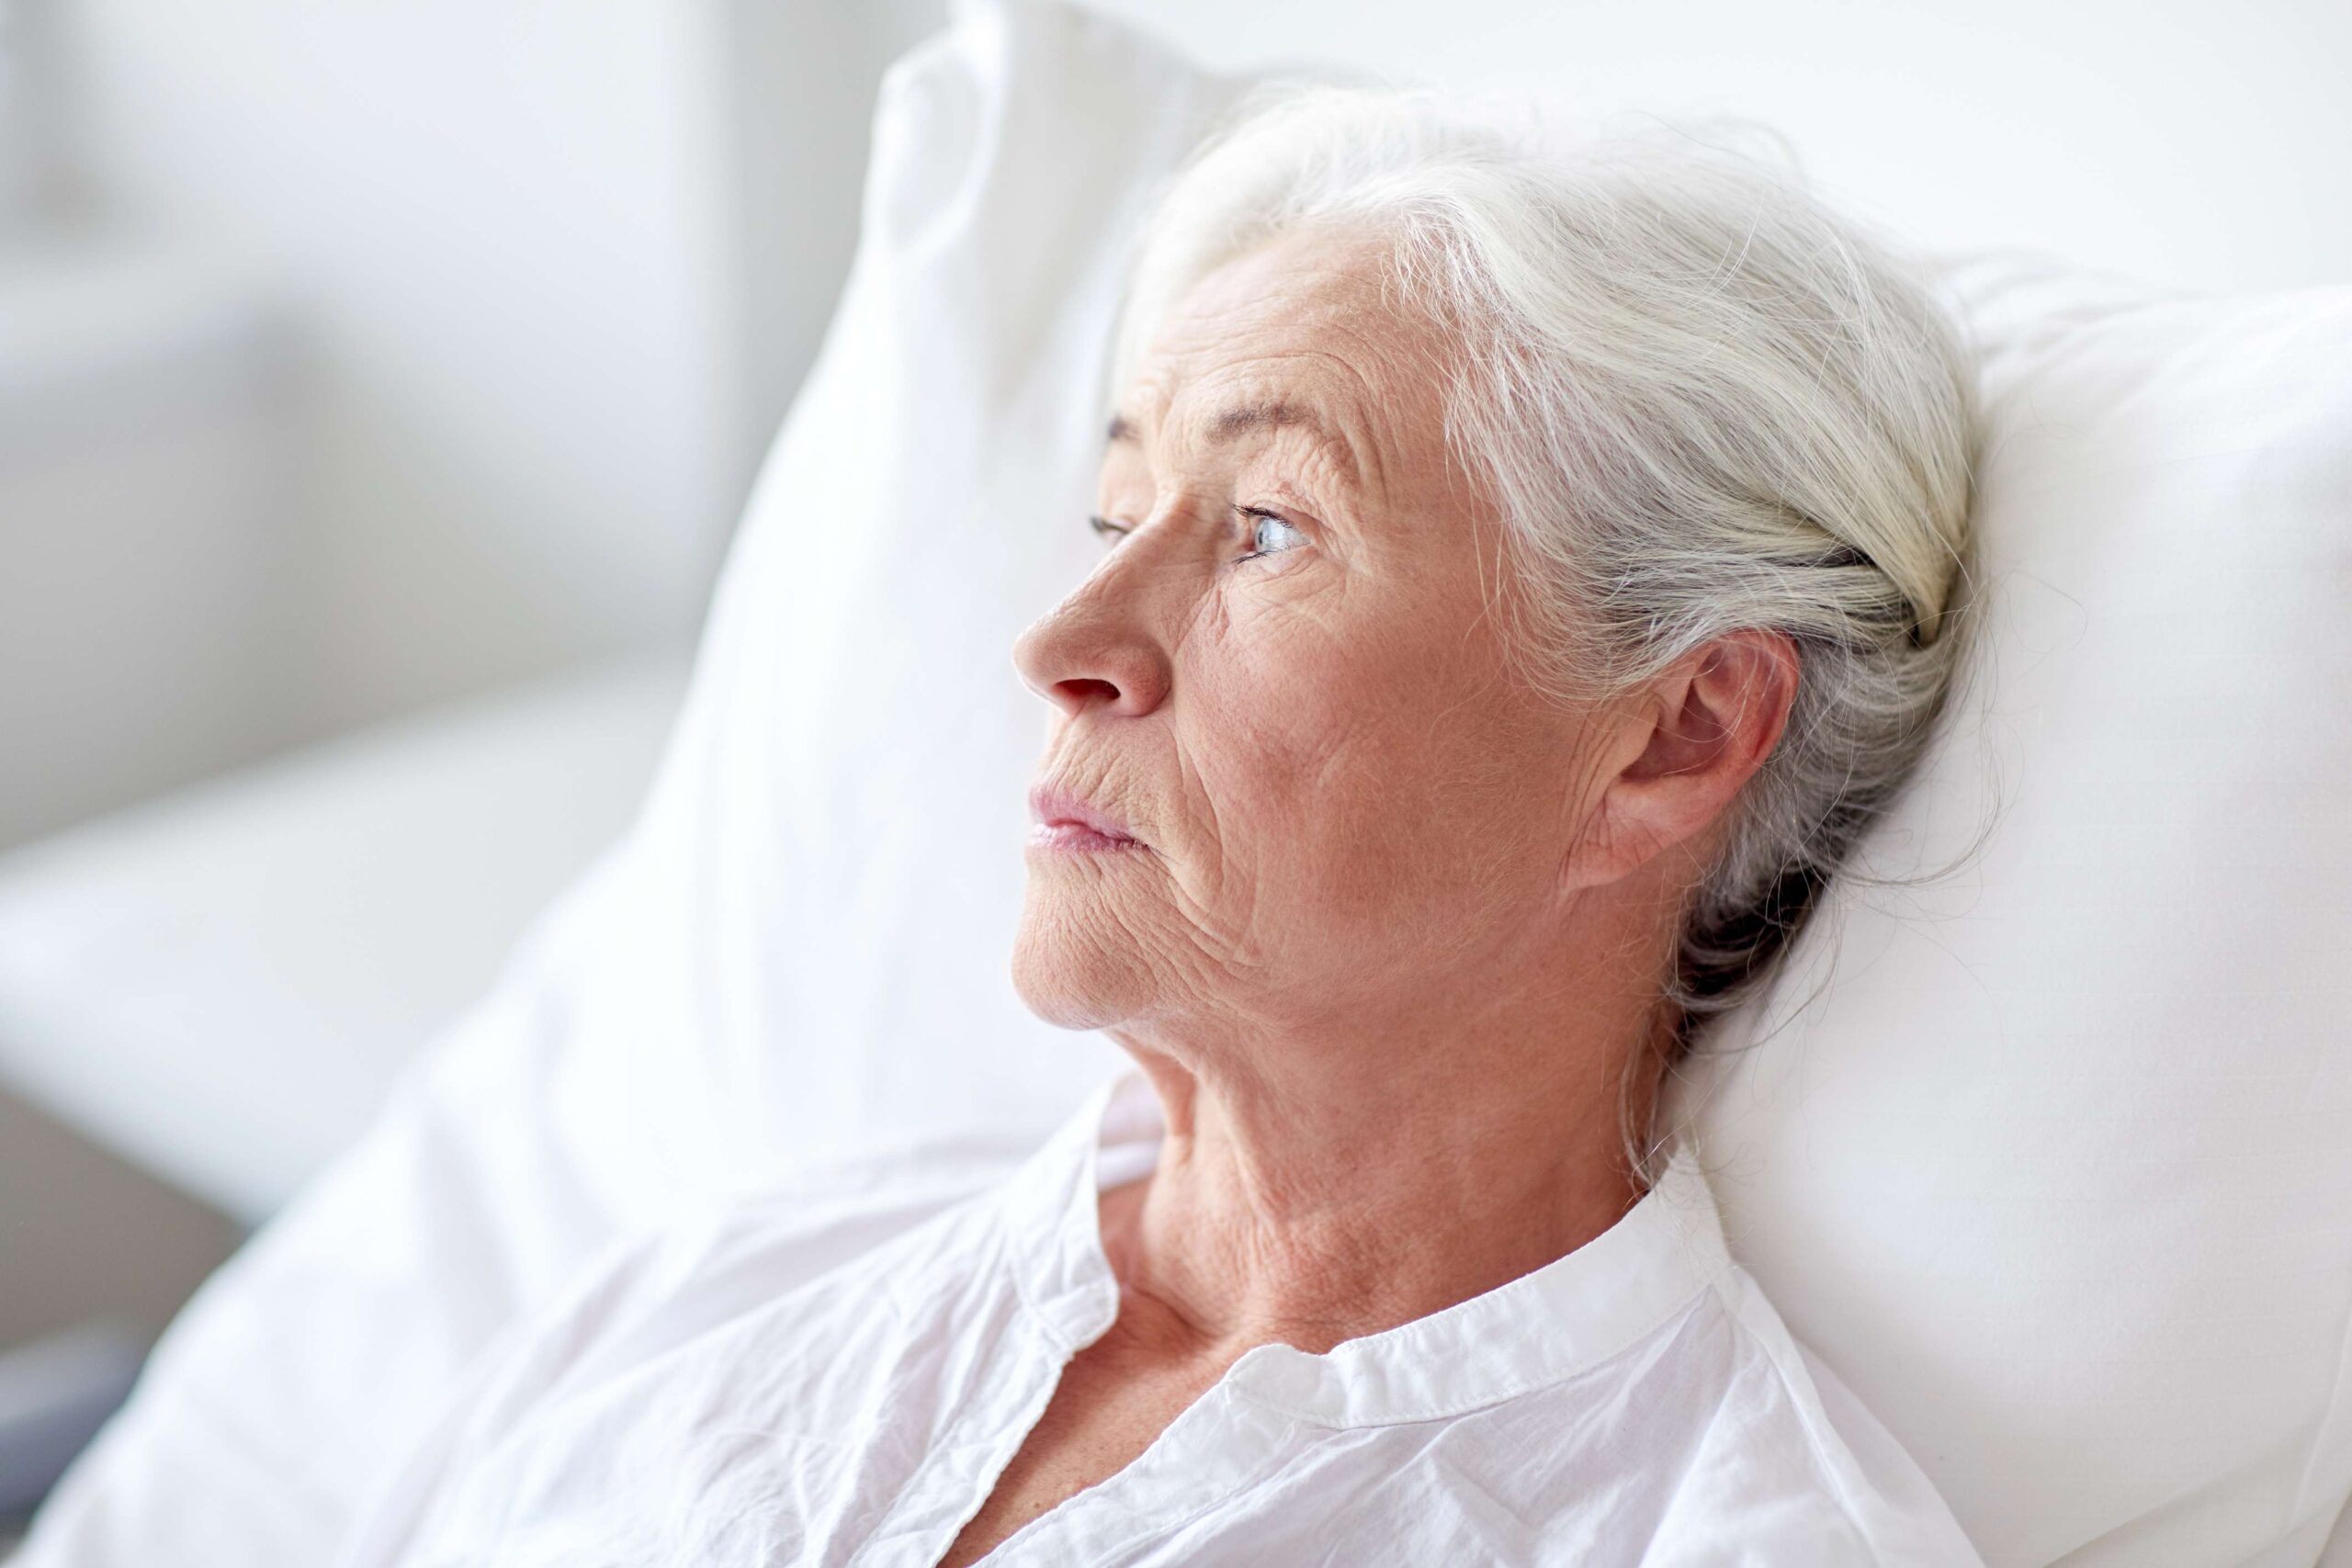 How often are elderly people in nursing homes undermonitored?